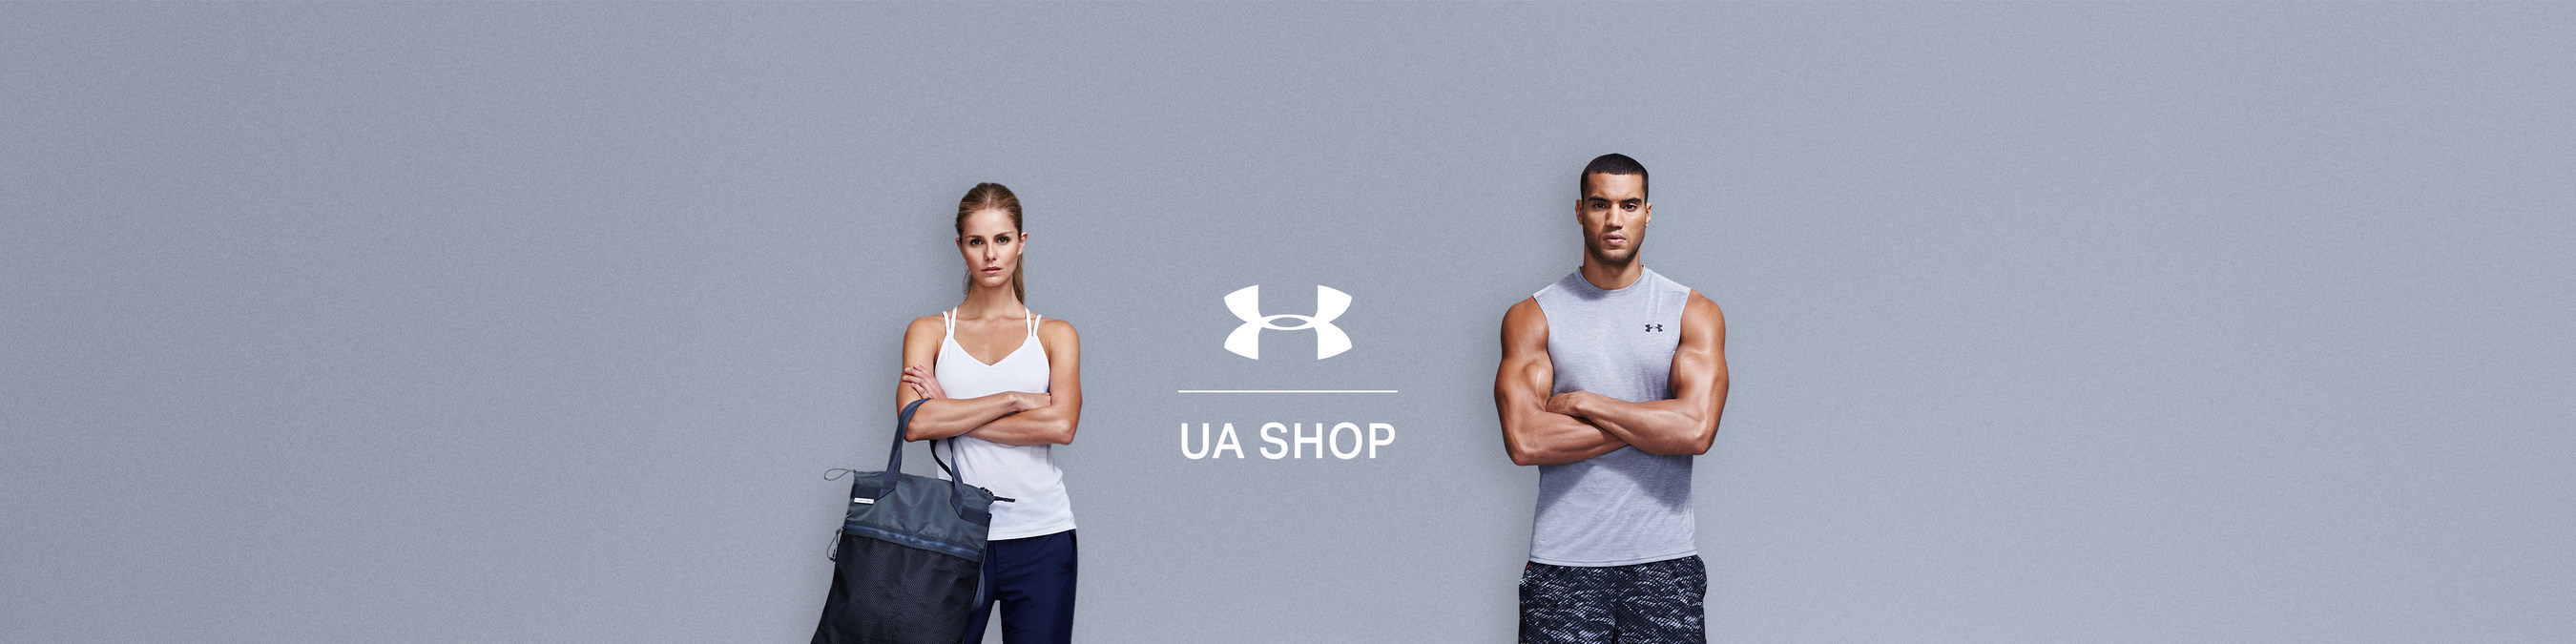 UNDER ARMOUR LAUNCHES UA SHOP, EXPANDING CONNECTED FITNESS SUITE WITH PERSONALIZED SHOPPING EXPERIENCE